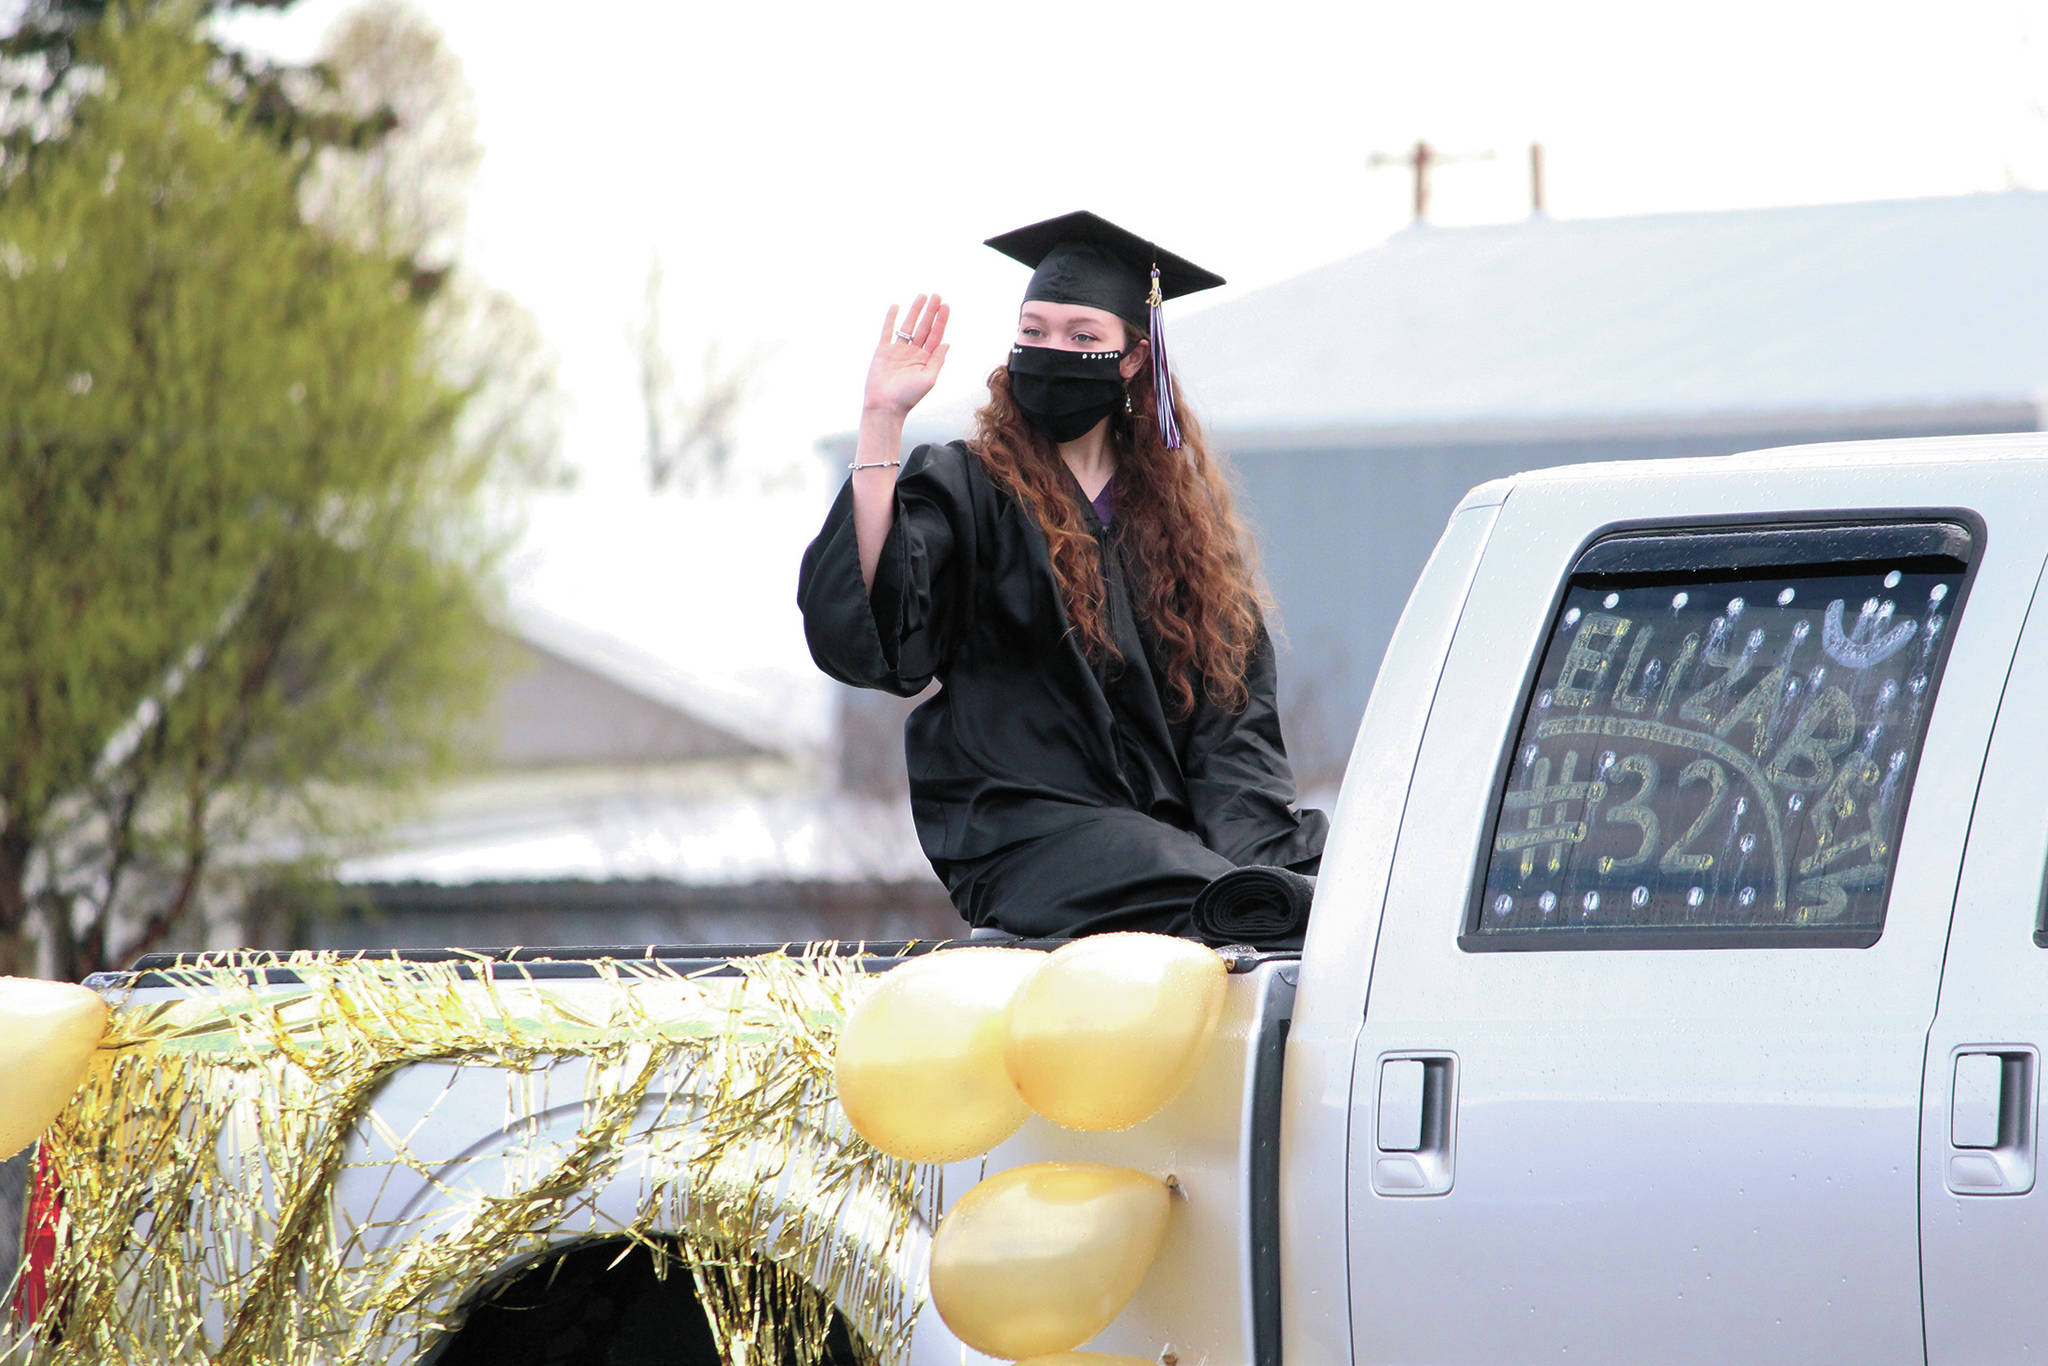 Nikolaevsk School graduate Elizabeth Fefelov waves as her family leaves the drive-in commencement celebration the school held Tuesday, May 19, 2020 in Nikolaevsk, Alaska. (Photo by Megan Pacer/Homer News)